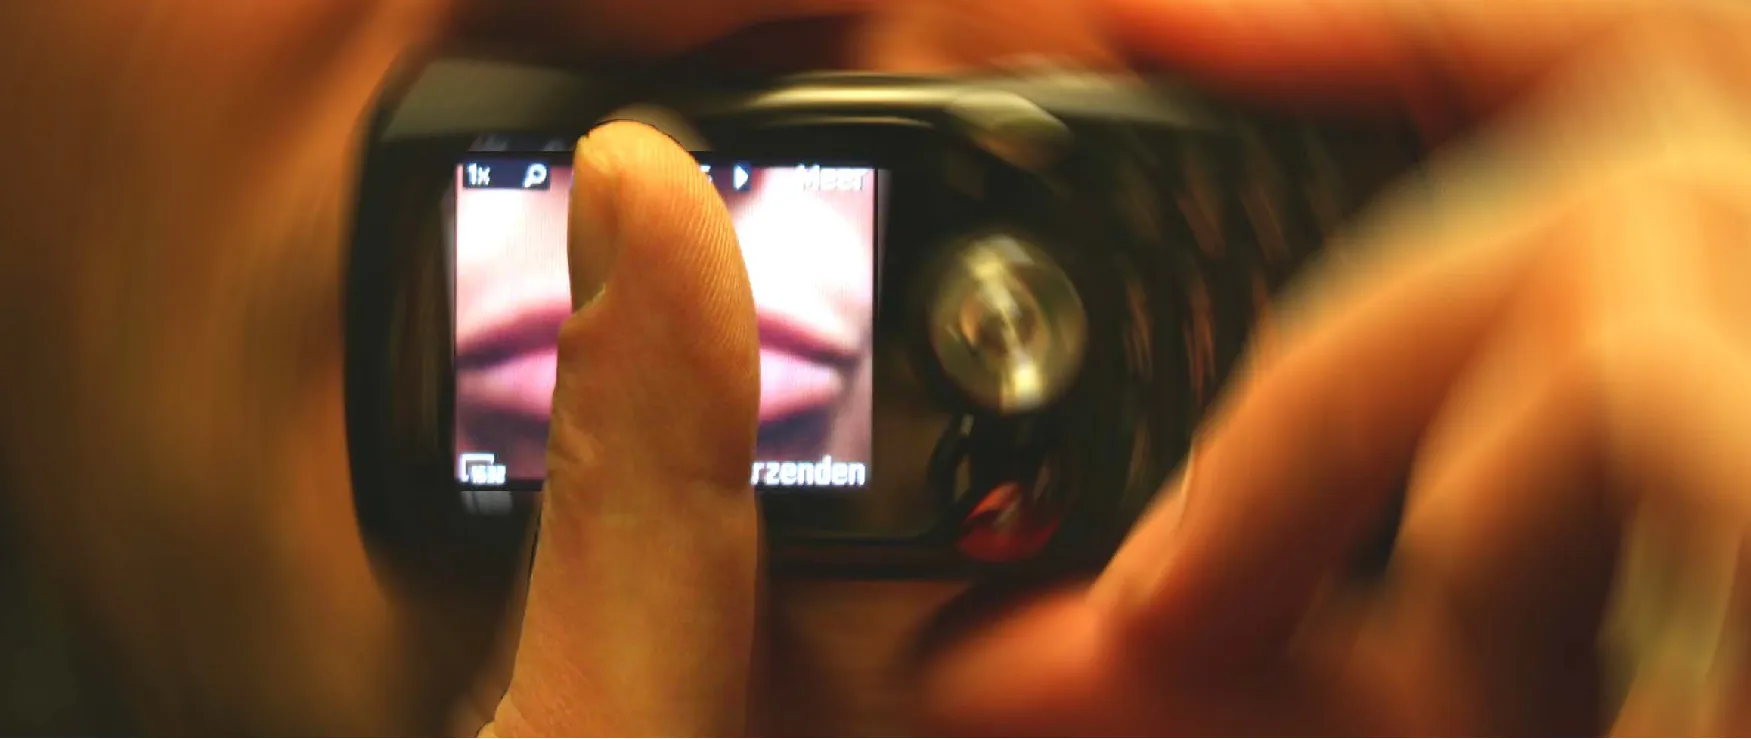 A person holding a phone with an image of lips over their own lips and then holding a finger over that image as if hushing someone. 